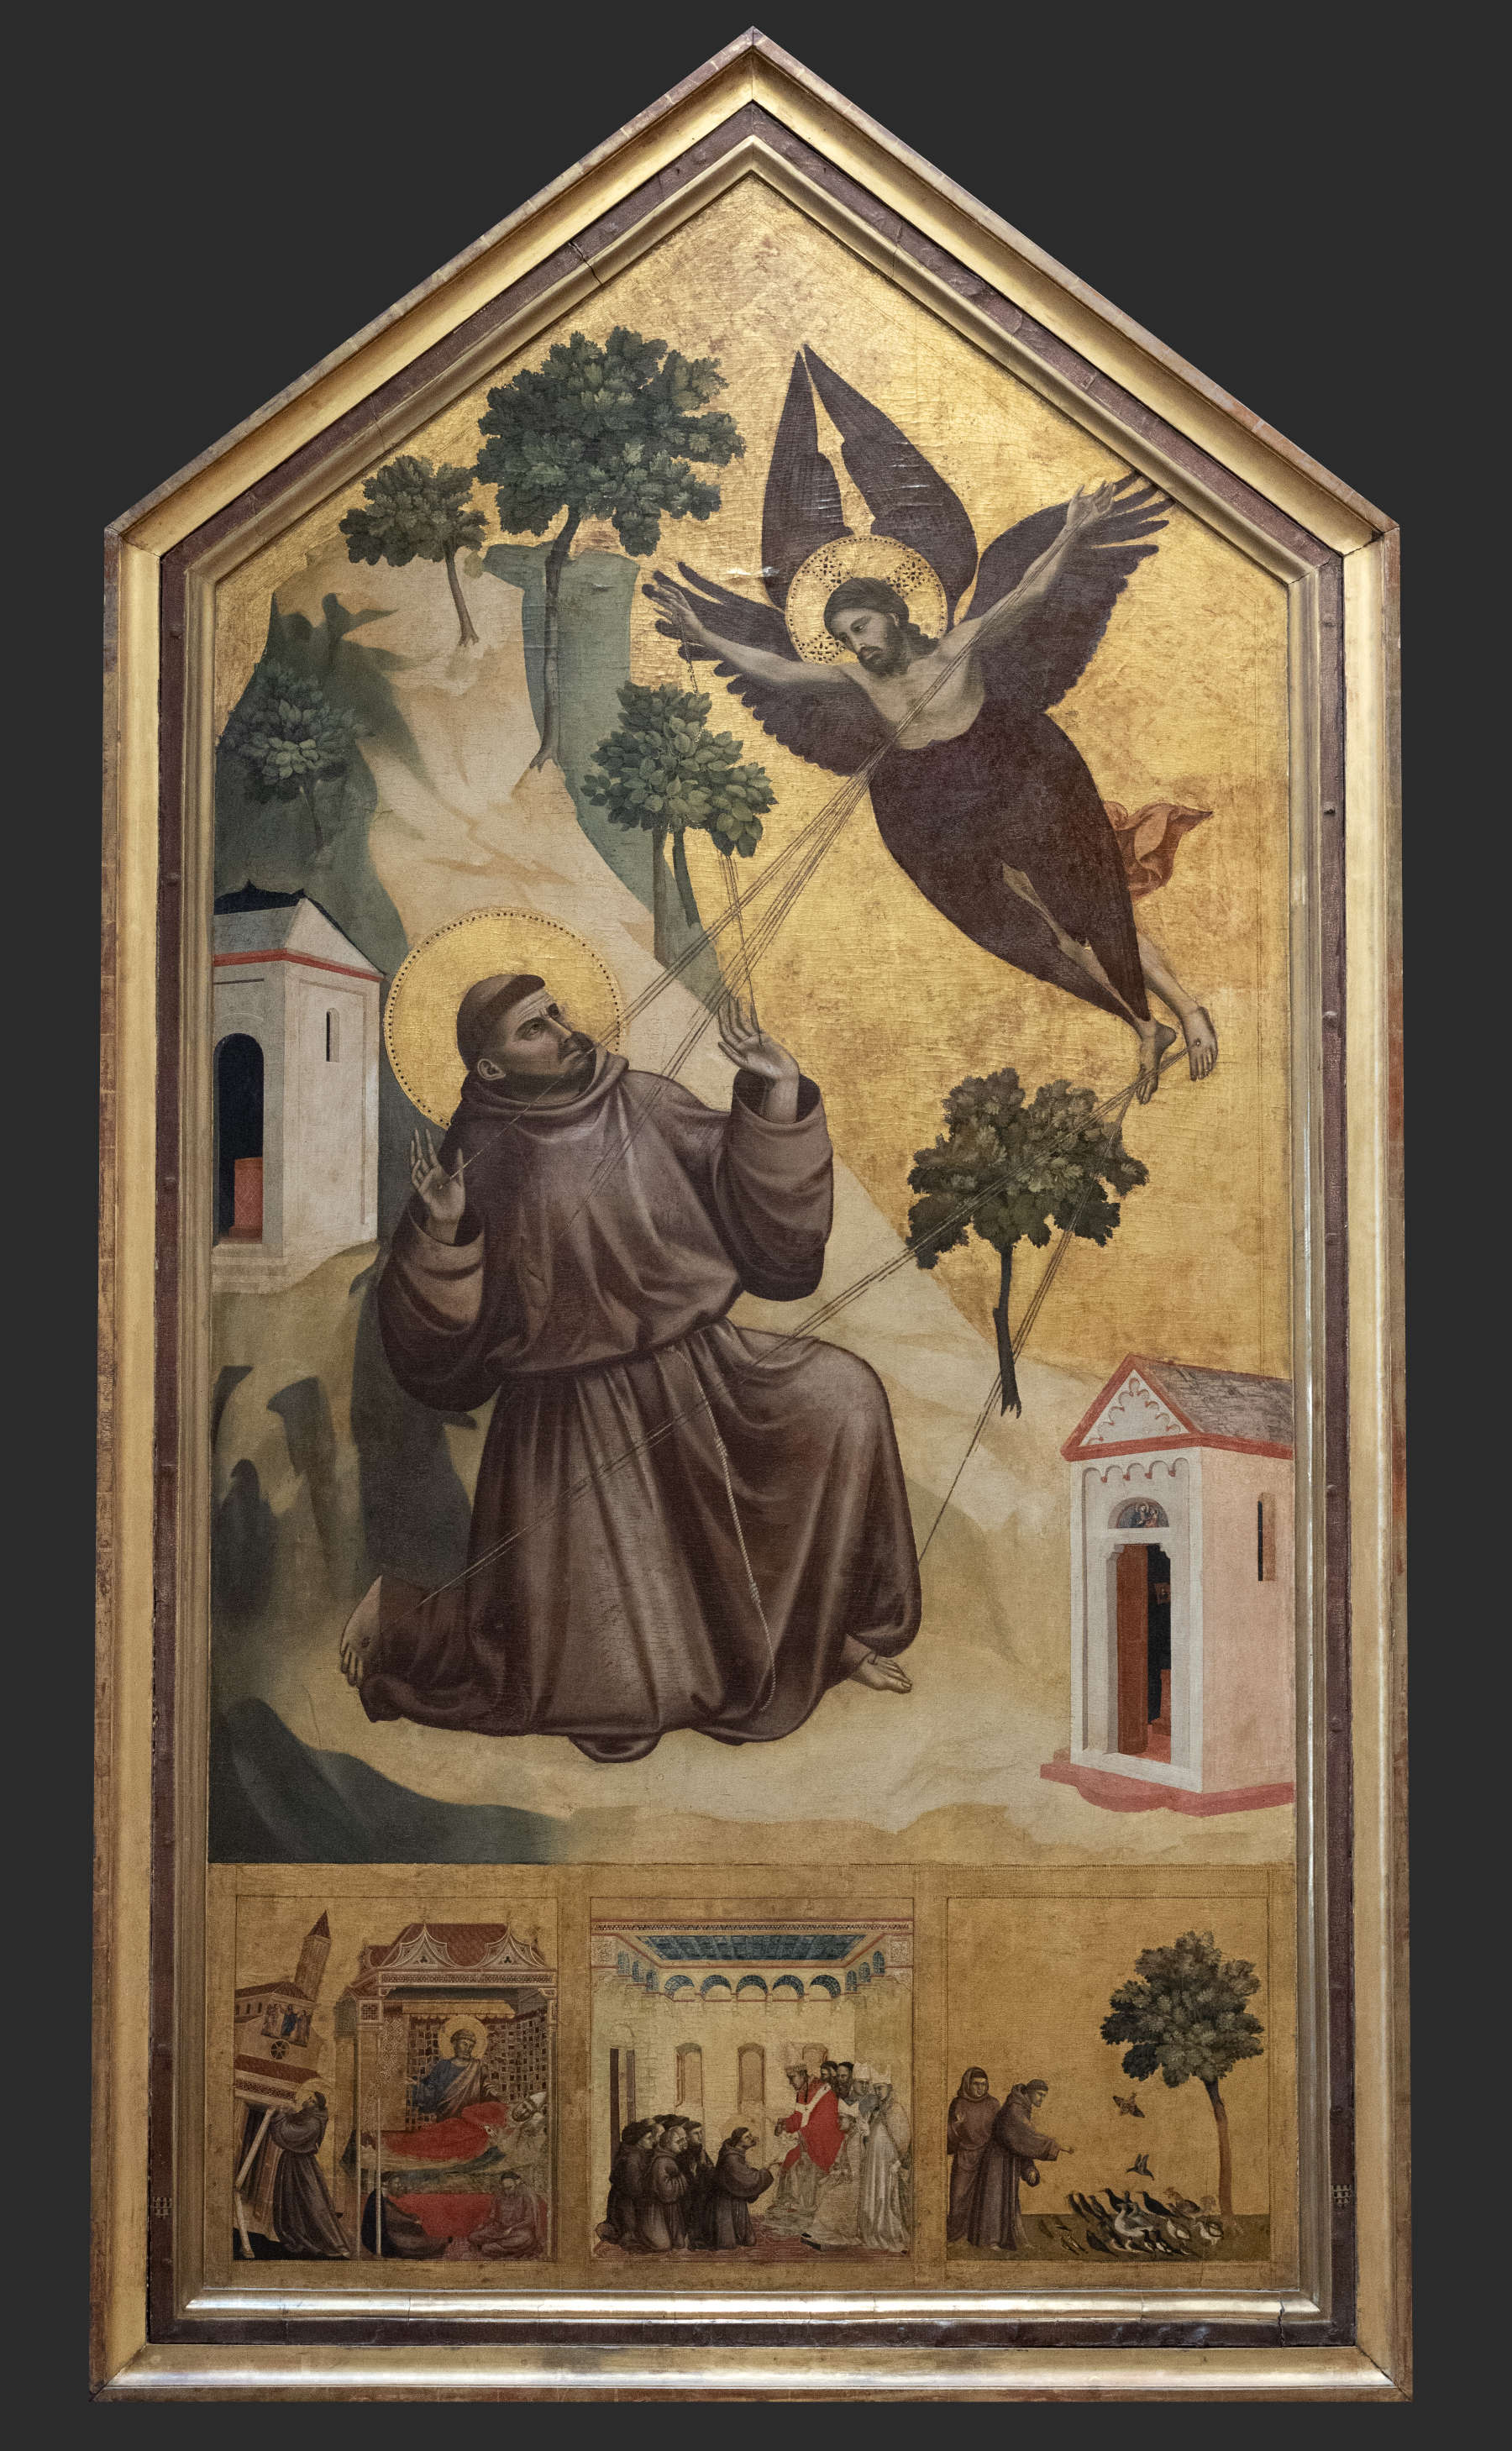 Giotto, The Stigmata of St. Francis (c. 1300-1325; tempera on panel with gold ground, 313 cm x 163 cm; Paris, Louvre)